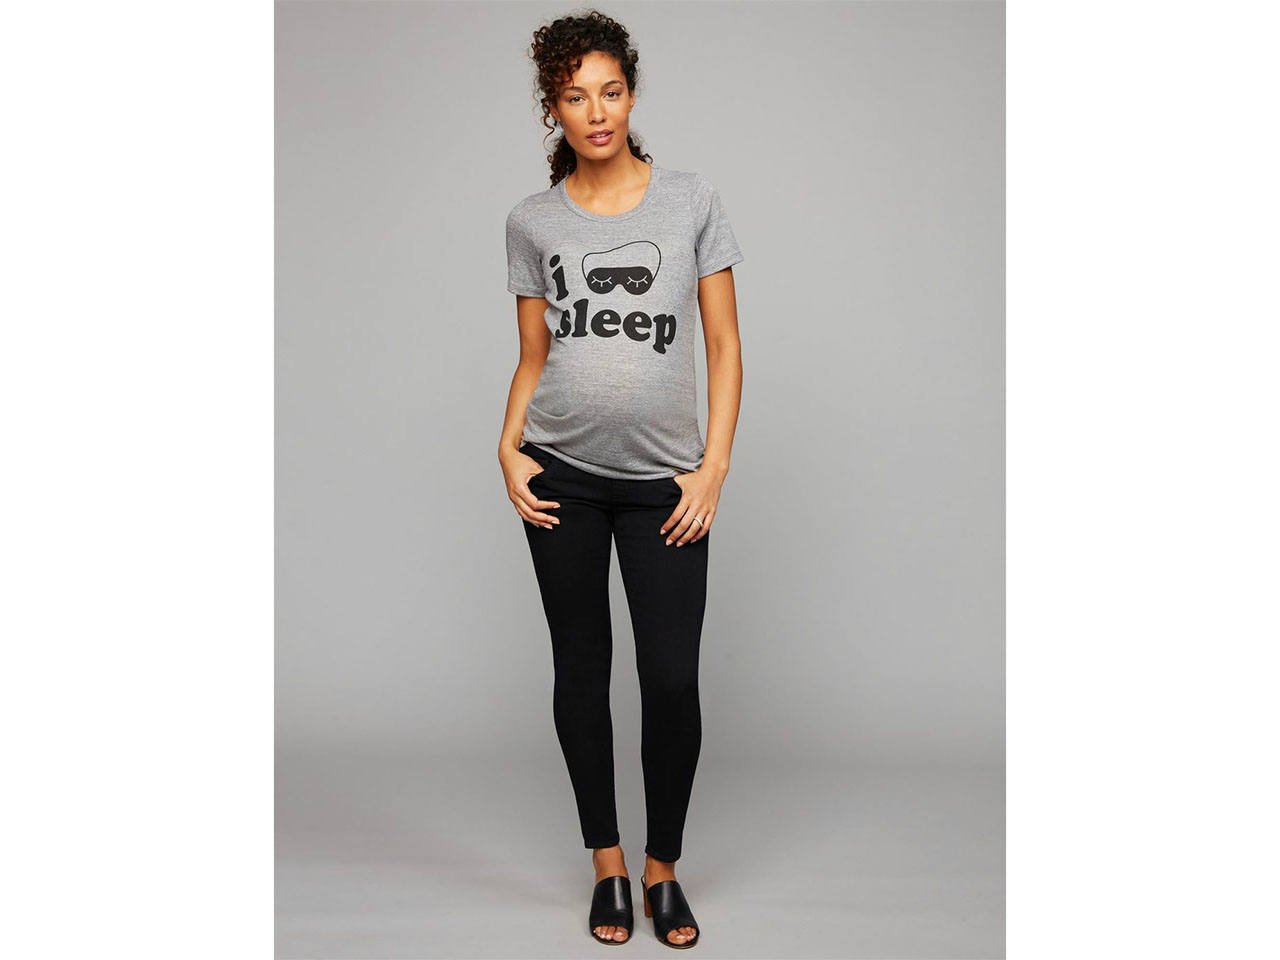 A pregnant woman wearing a grey maternity t-shirt that says I sleep